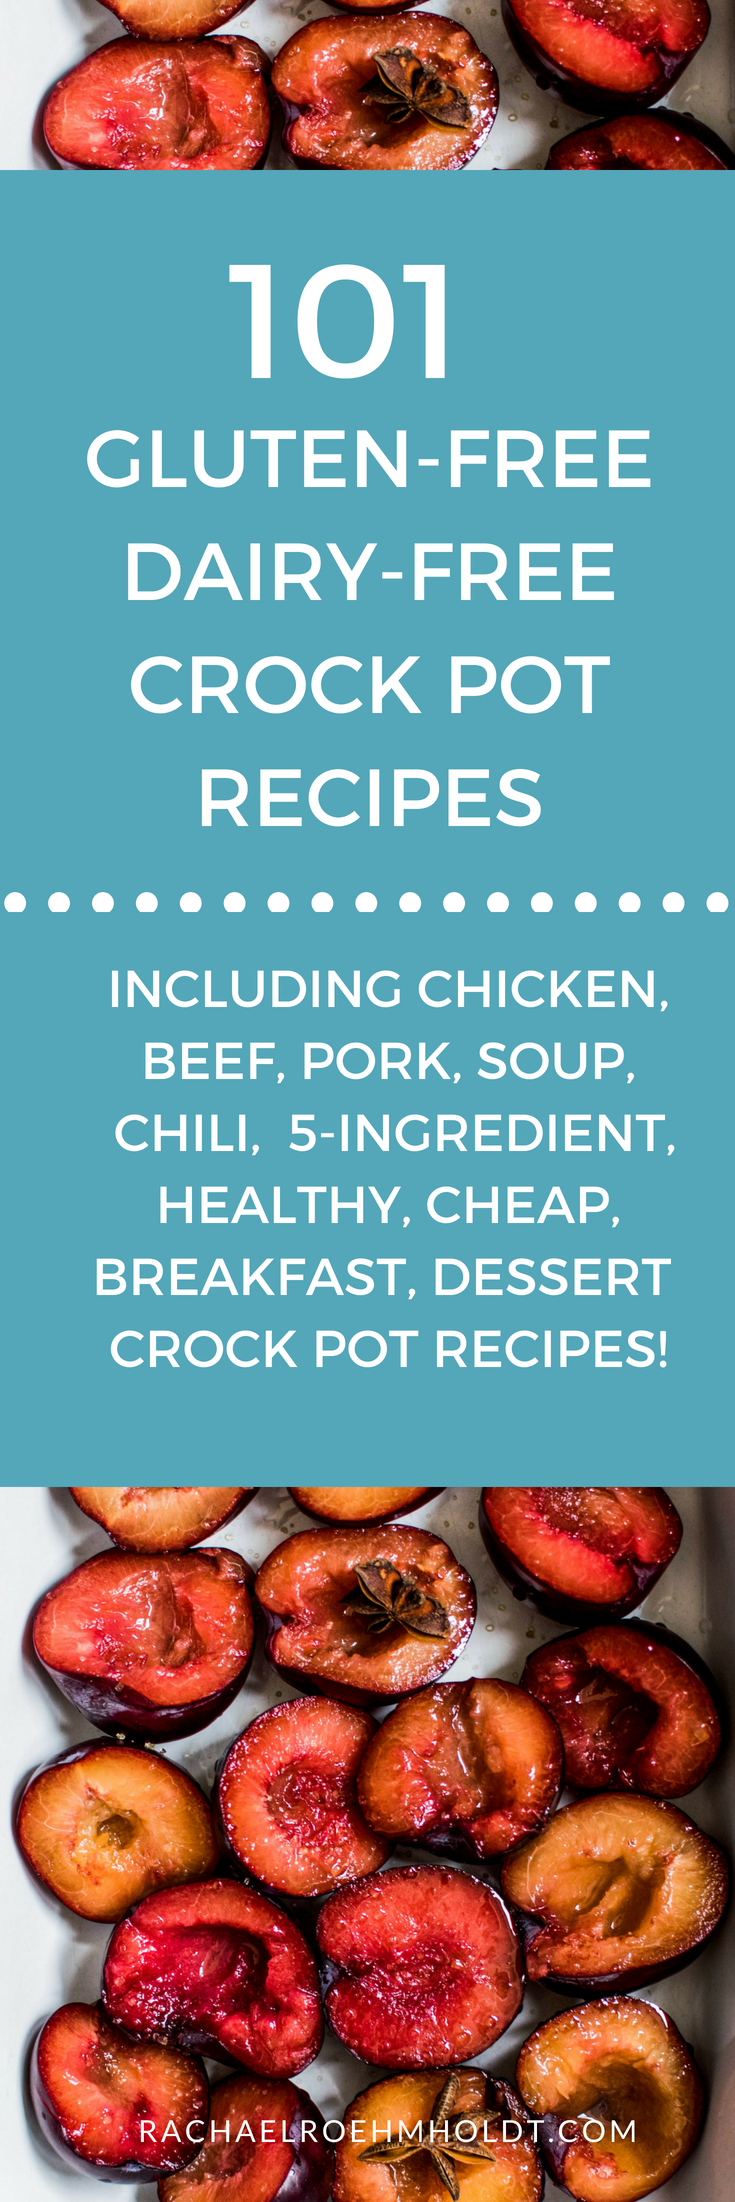 101 Gluten-free Dairy-free Crock Pot Recipes. Included in this gluten-free dairy-free recipe roundup are: healthy, chicken, beef, pork, soup, chili, breakfast, 5-ingredients or less, cheap, and dessert recipes. Click through to check out all the awesome recipes at RachaelRoehmholdt.com.